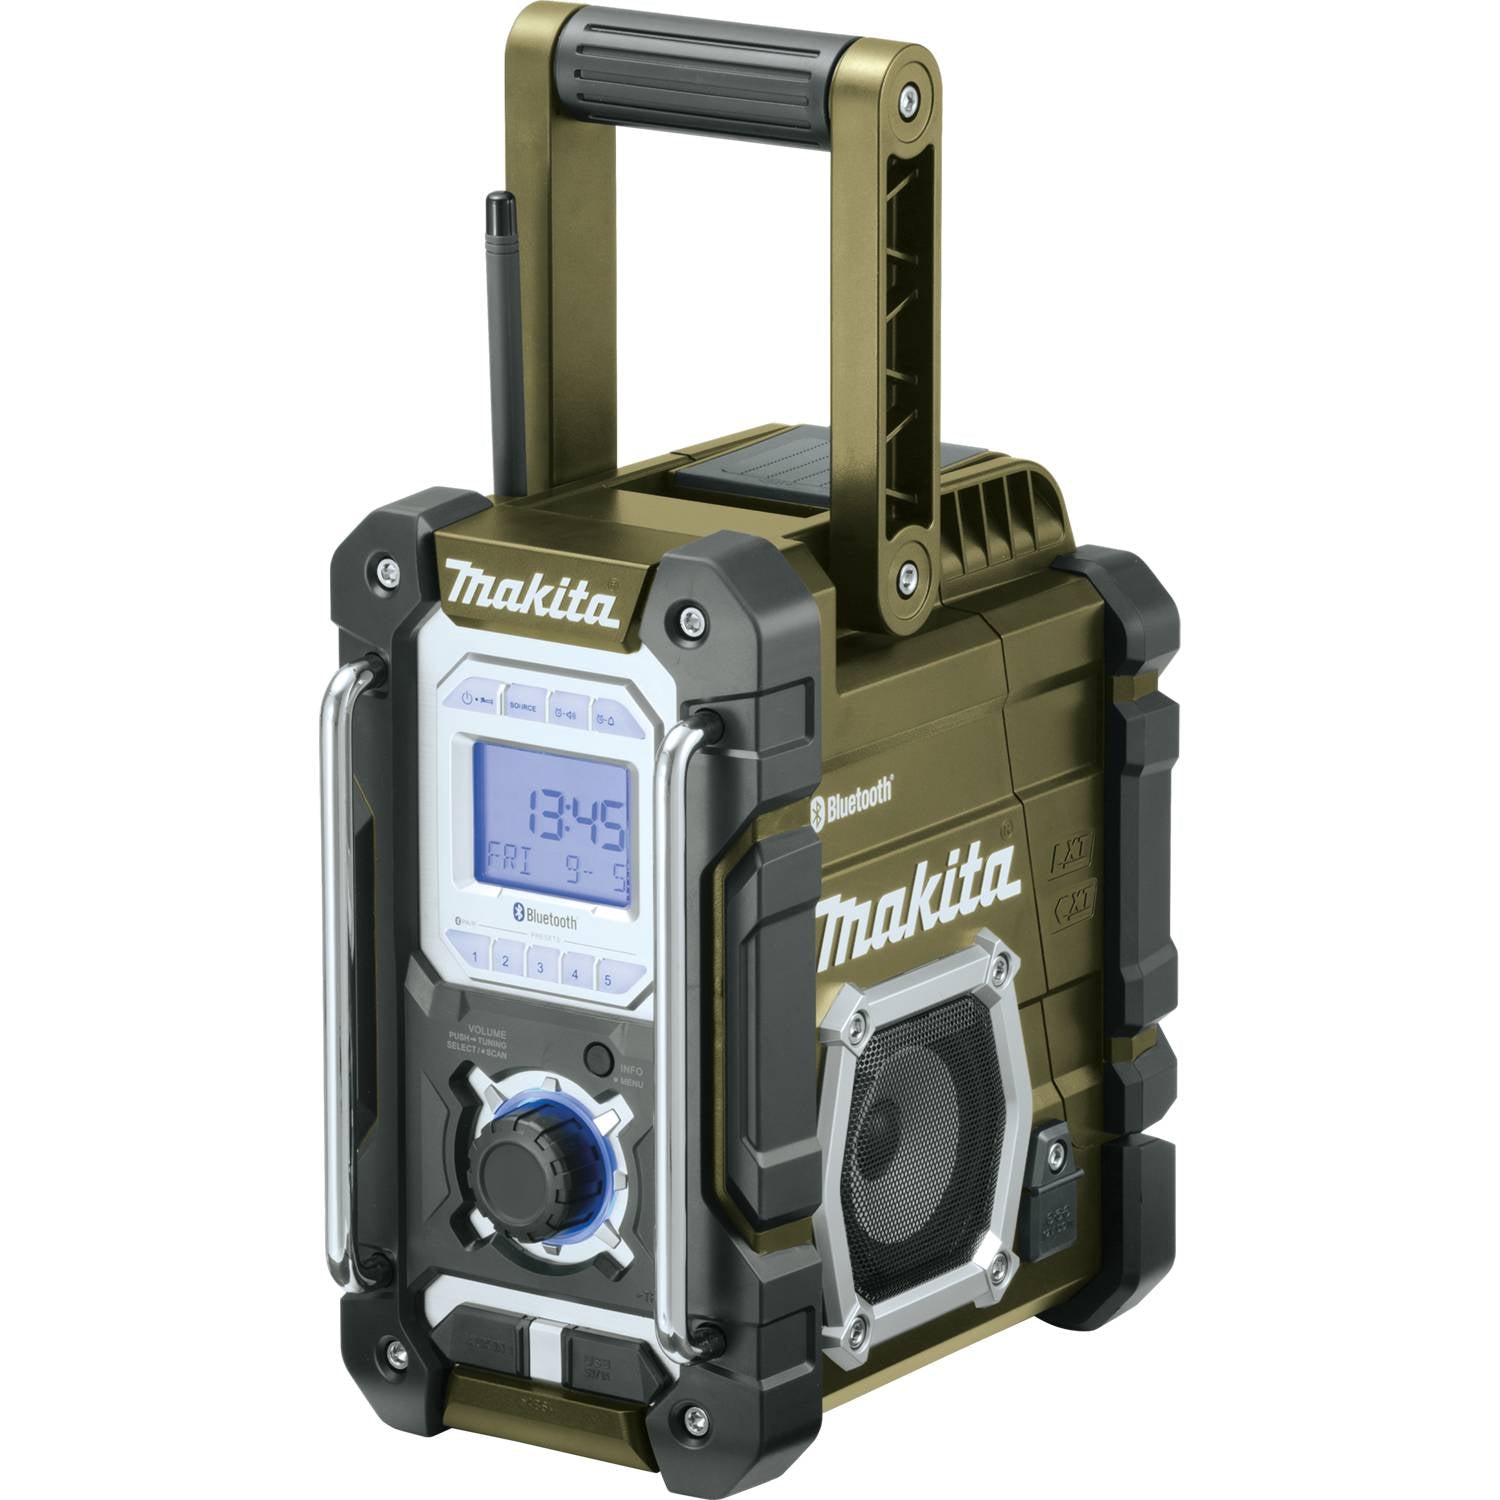 Makita ADRM06 Outdoor Adventure 18V LXT Lithium-Ion Bluetooth Radio (Tool Only)